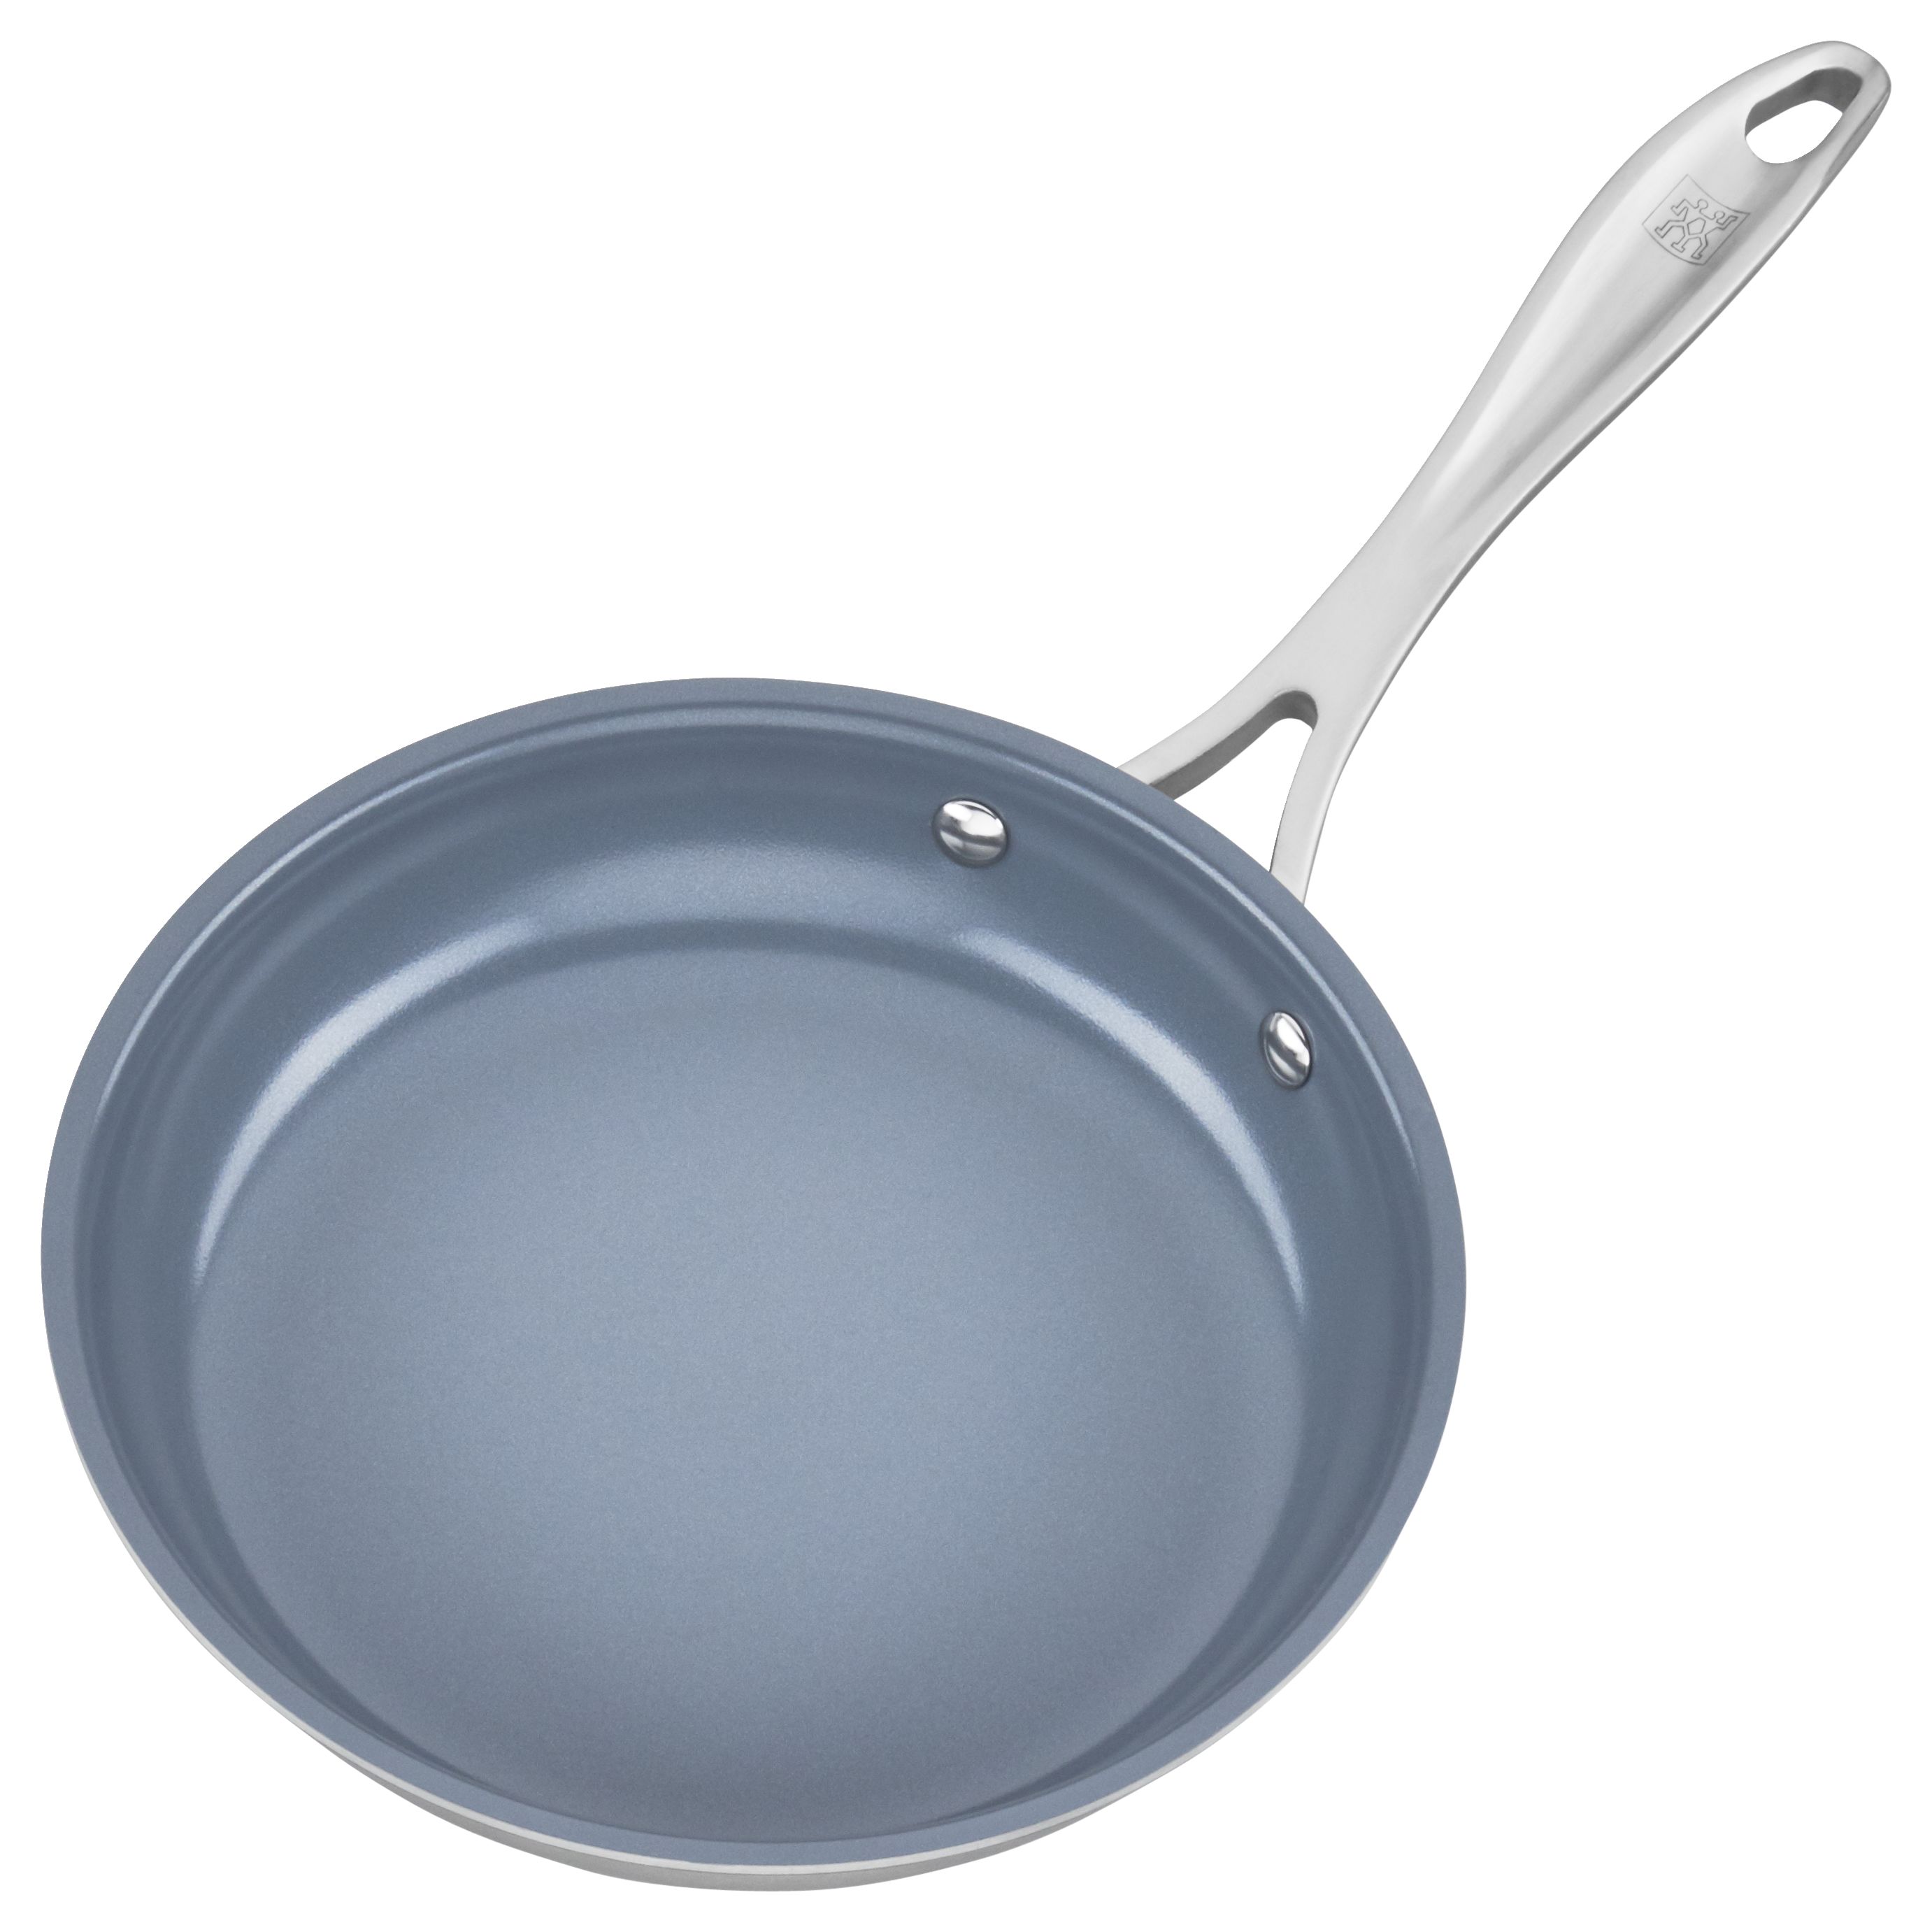 Zwilling ZWILLING Energy Plus 8-inch Stainless Steel Ceramic Nonstick Fry  Pan